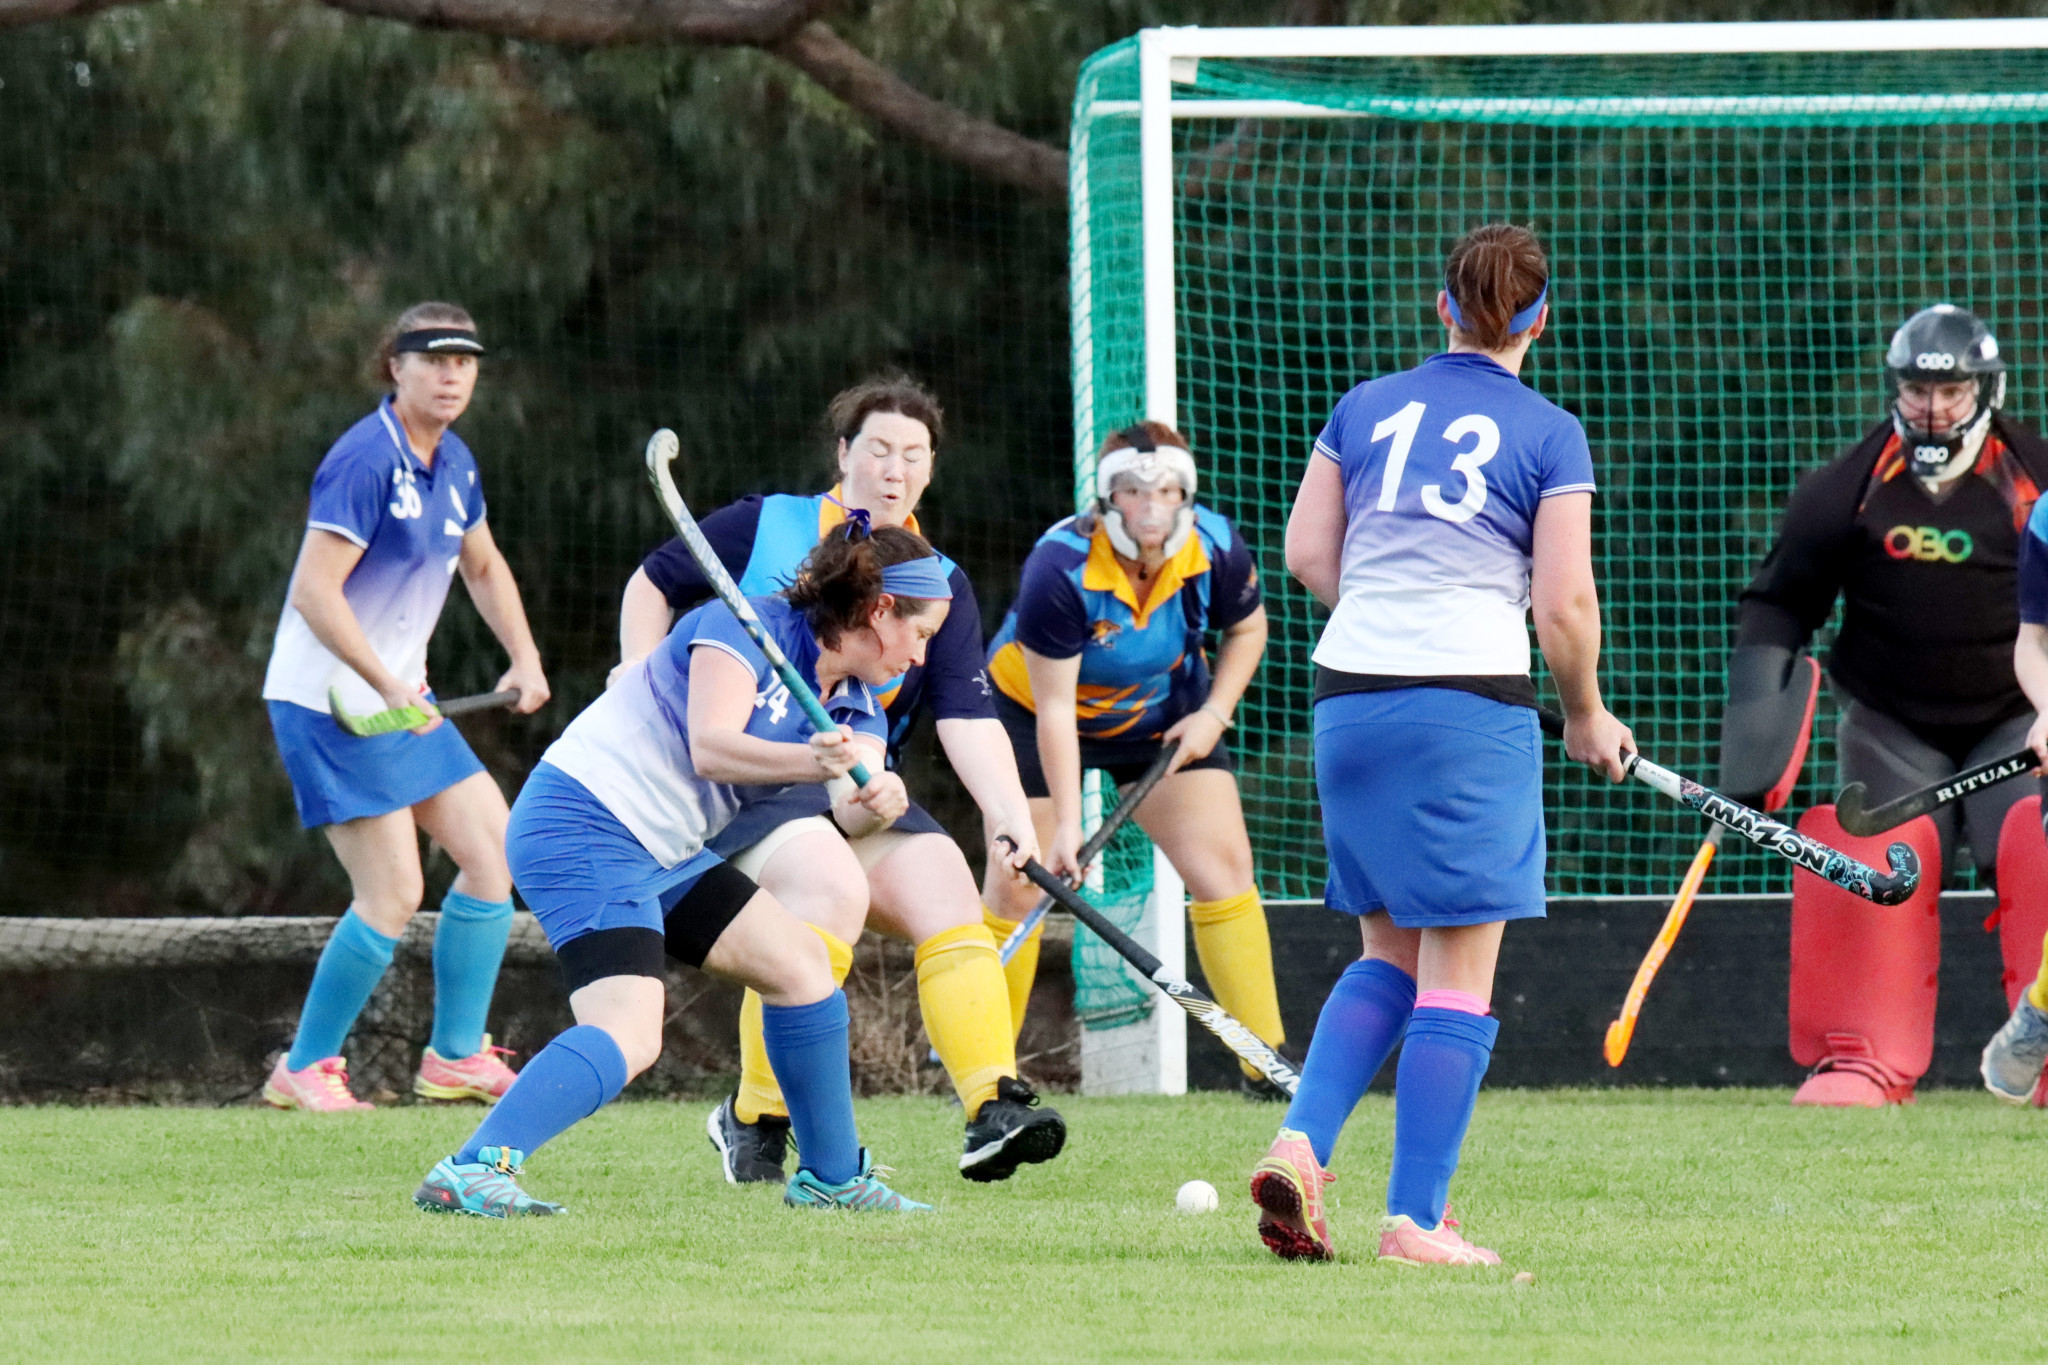 Kaniva’s Nyree Hutchins winds up for a shot at goal from a penalty corner. PHOTO: SIMON KING